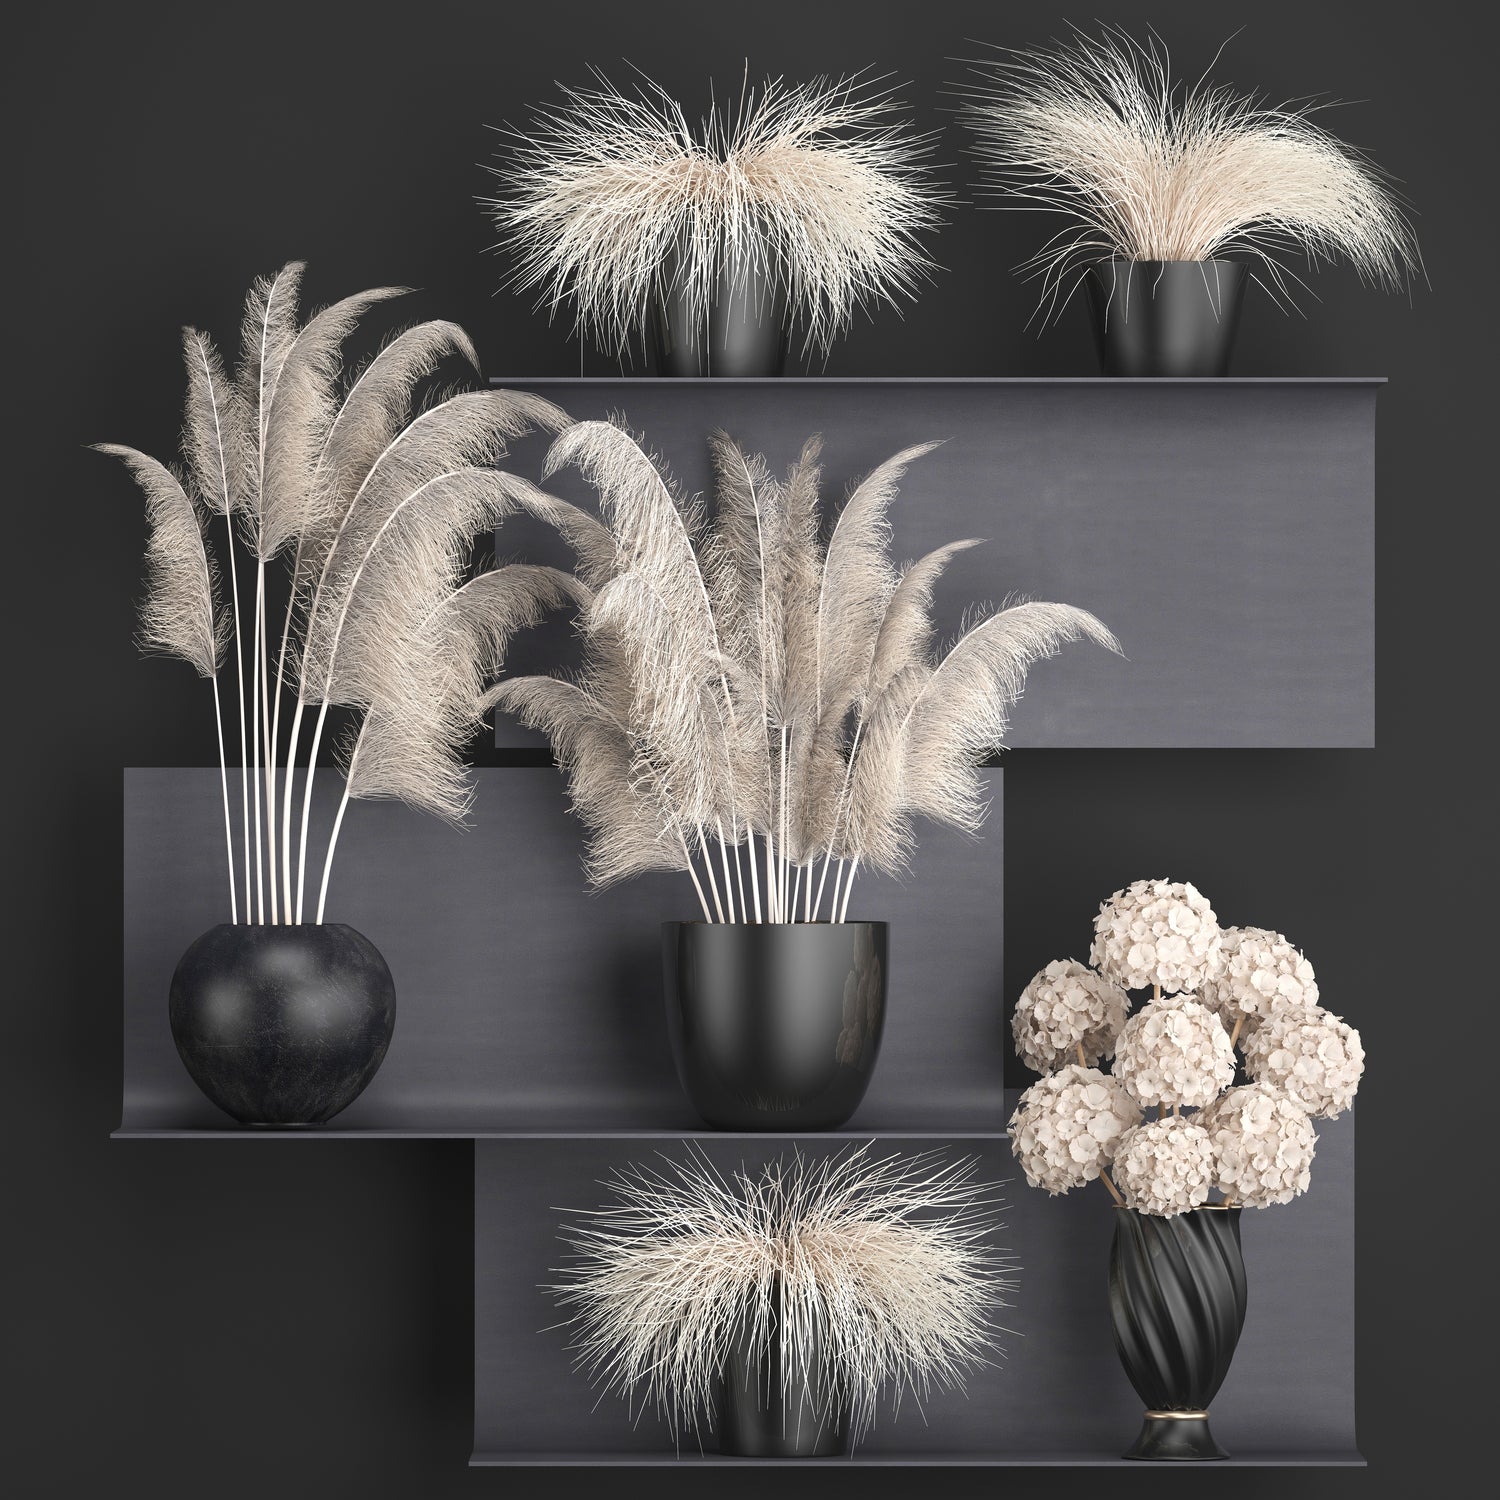 decorative white cream colour dried flowers and grasses in black vases on grey shelves